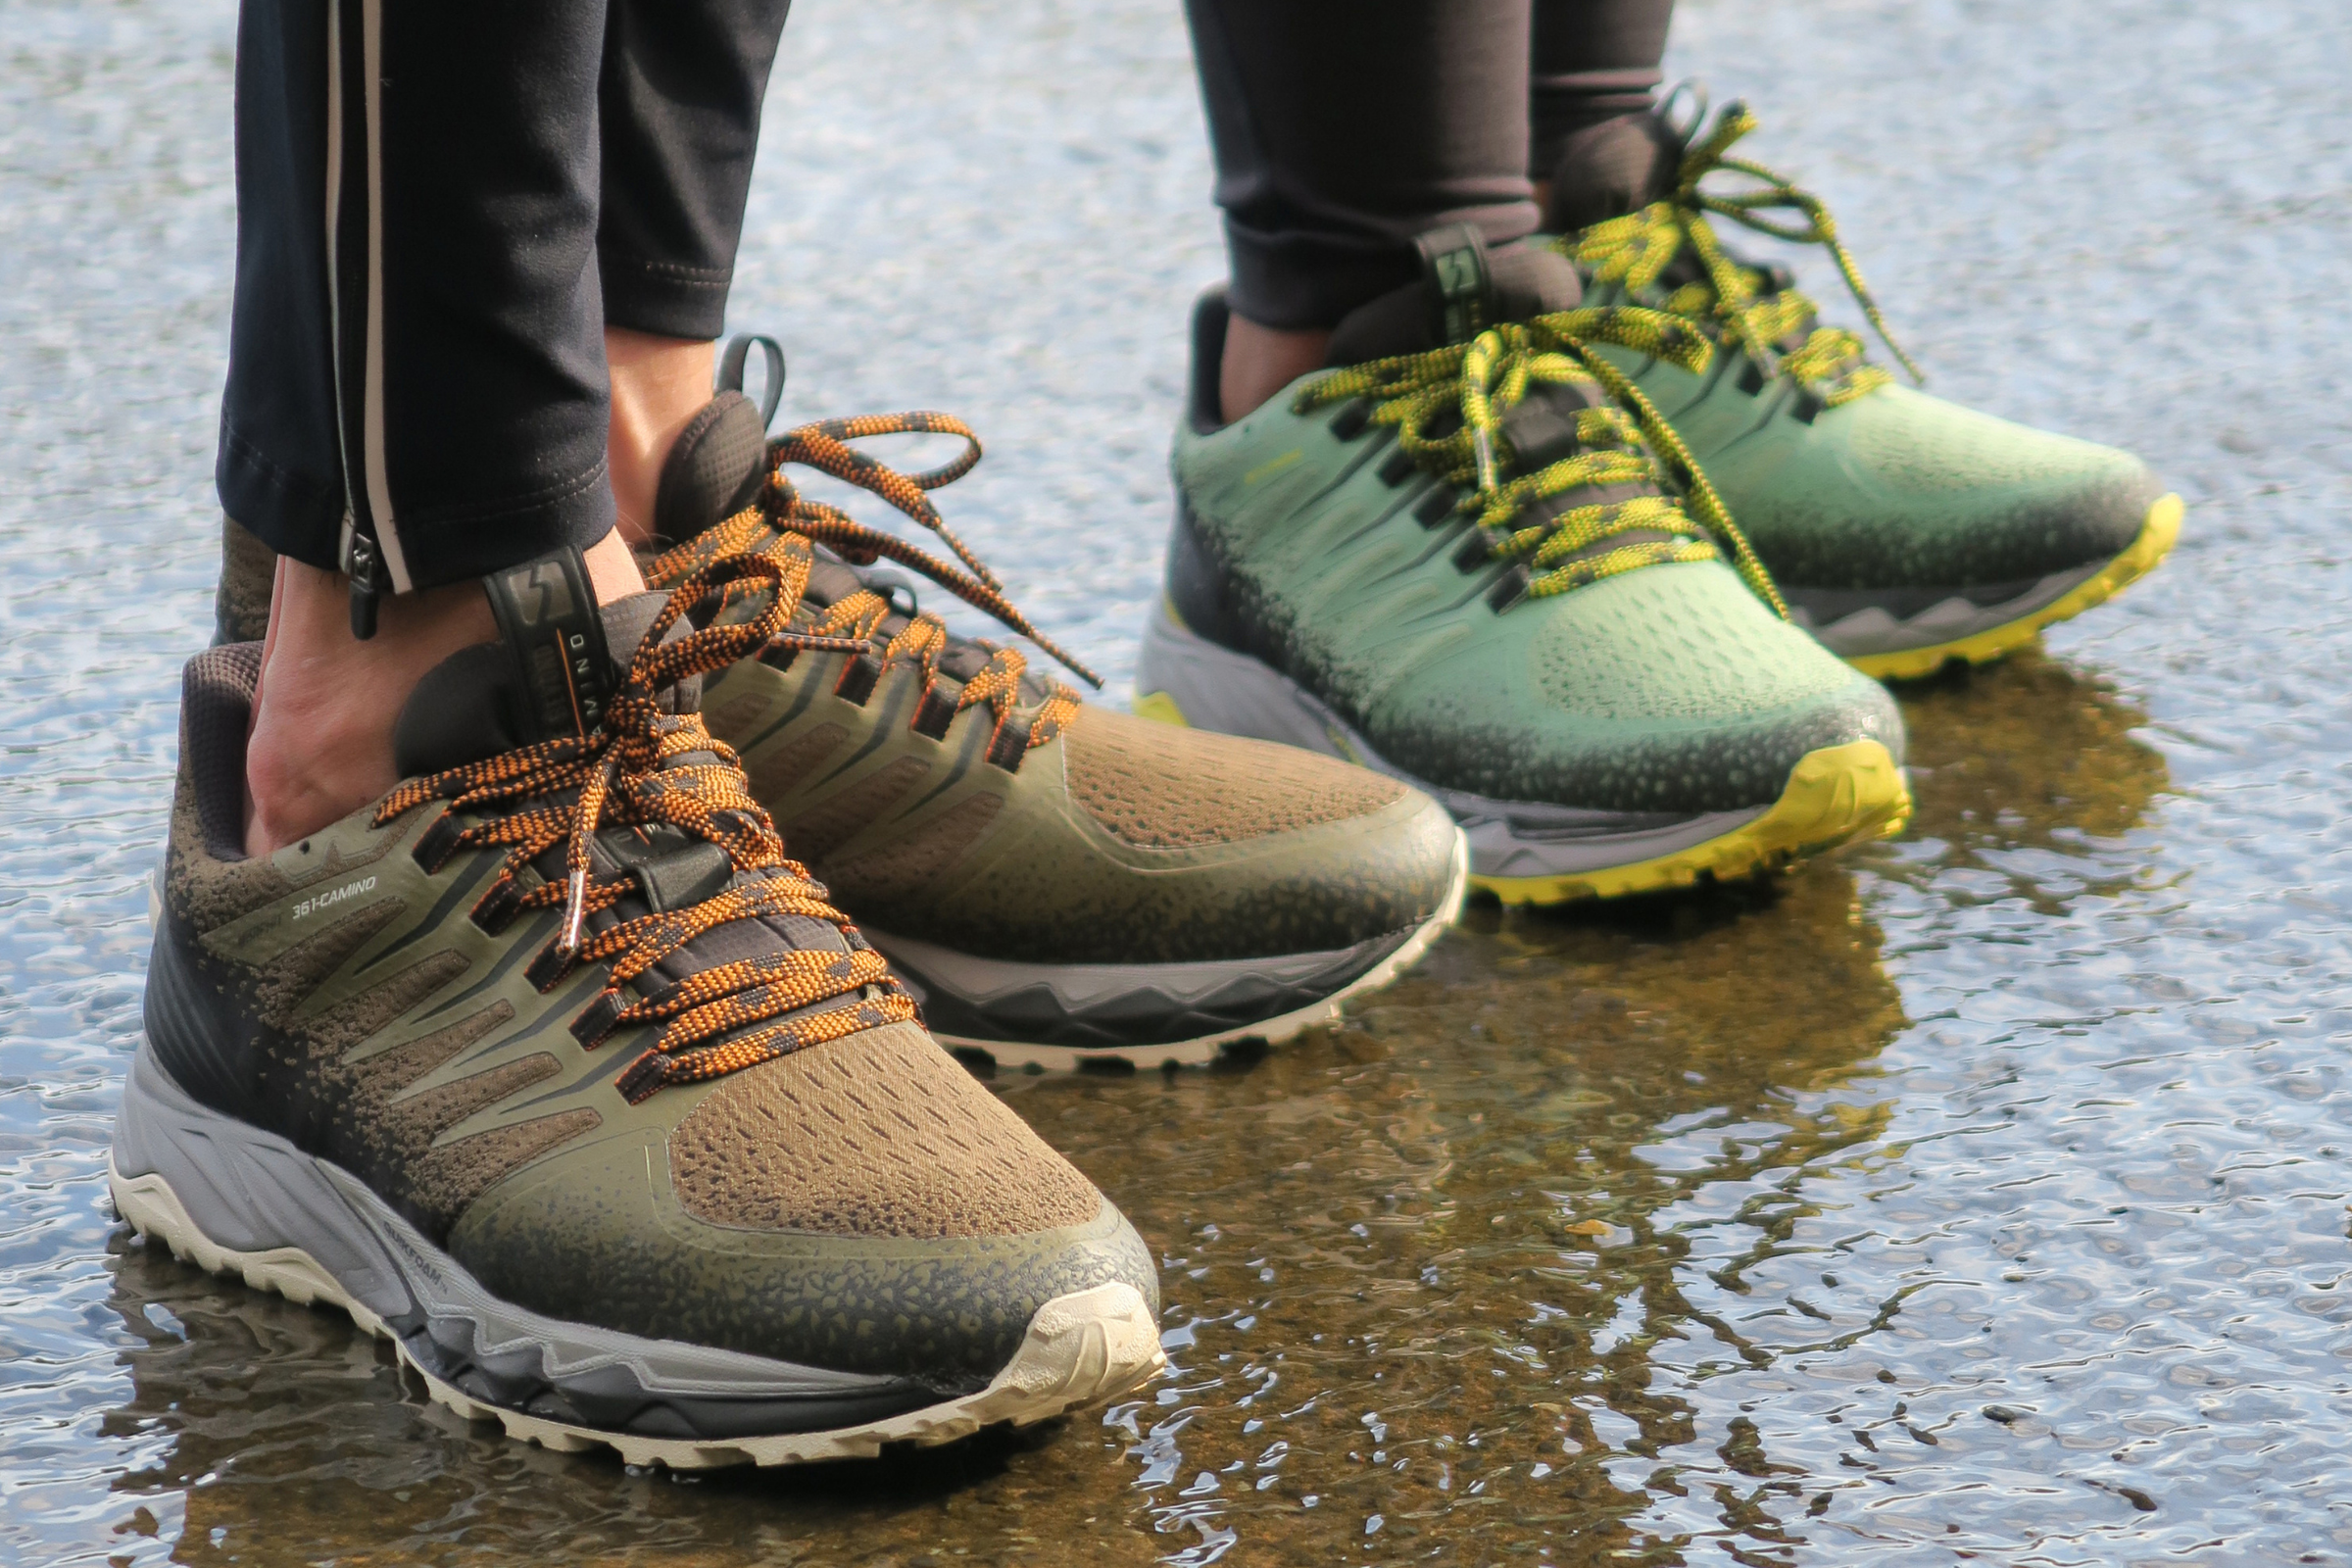 Check out the Camino WP trail shoes from 361° Europe